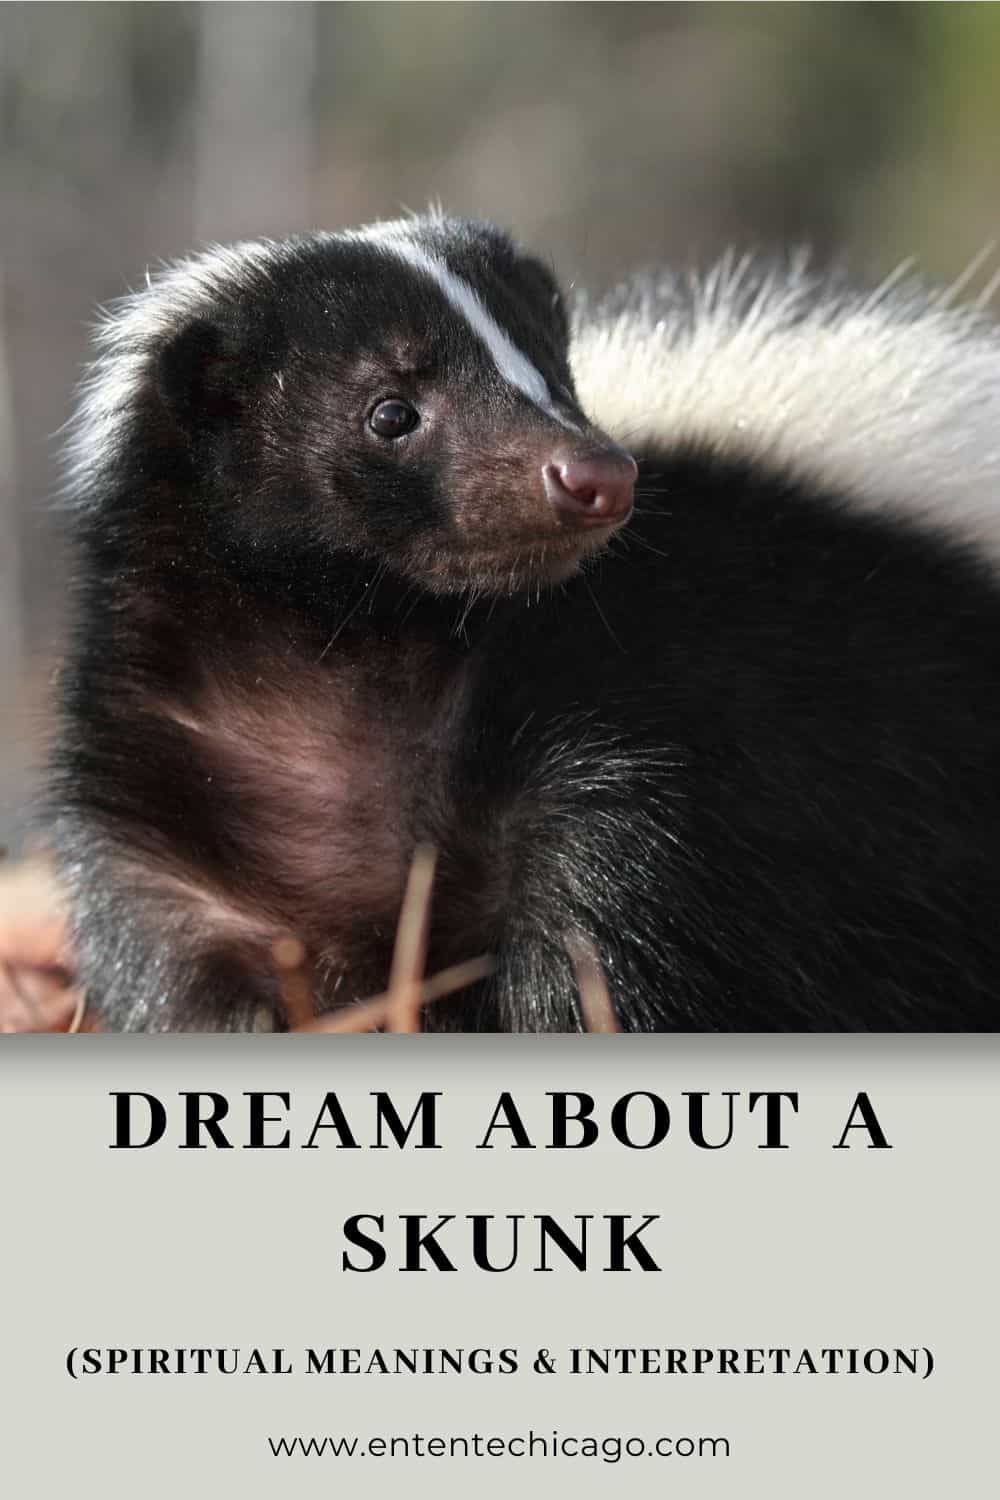 What Is the Spiritual Meaning of a Skunk in a Dream